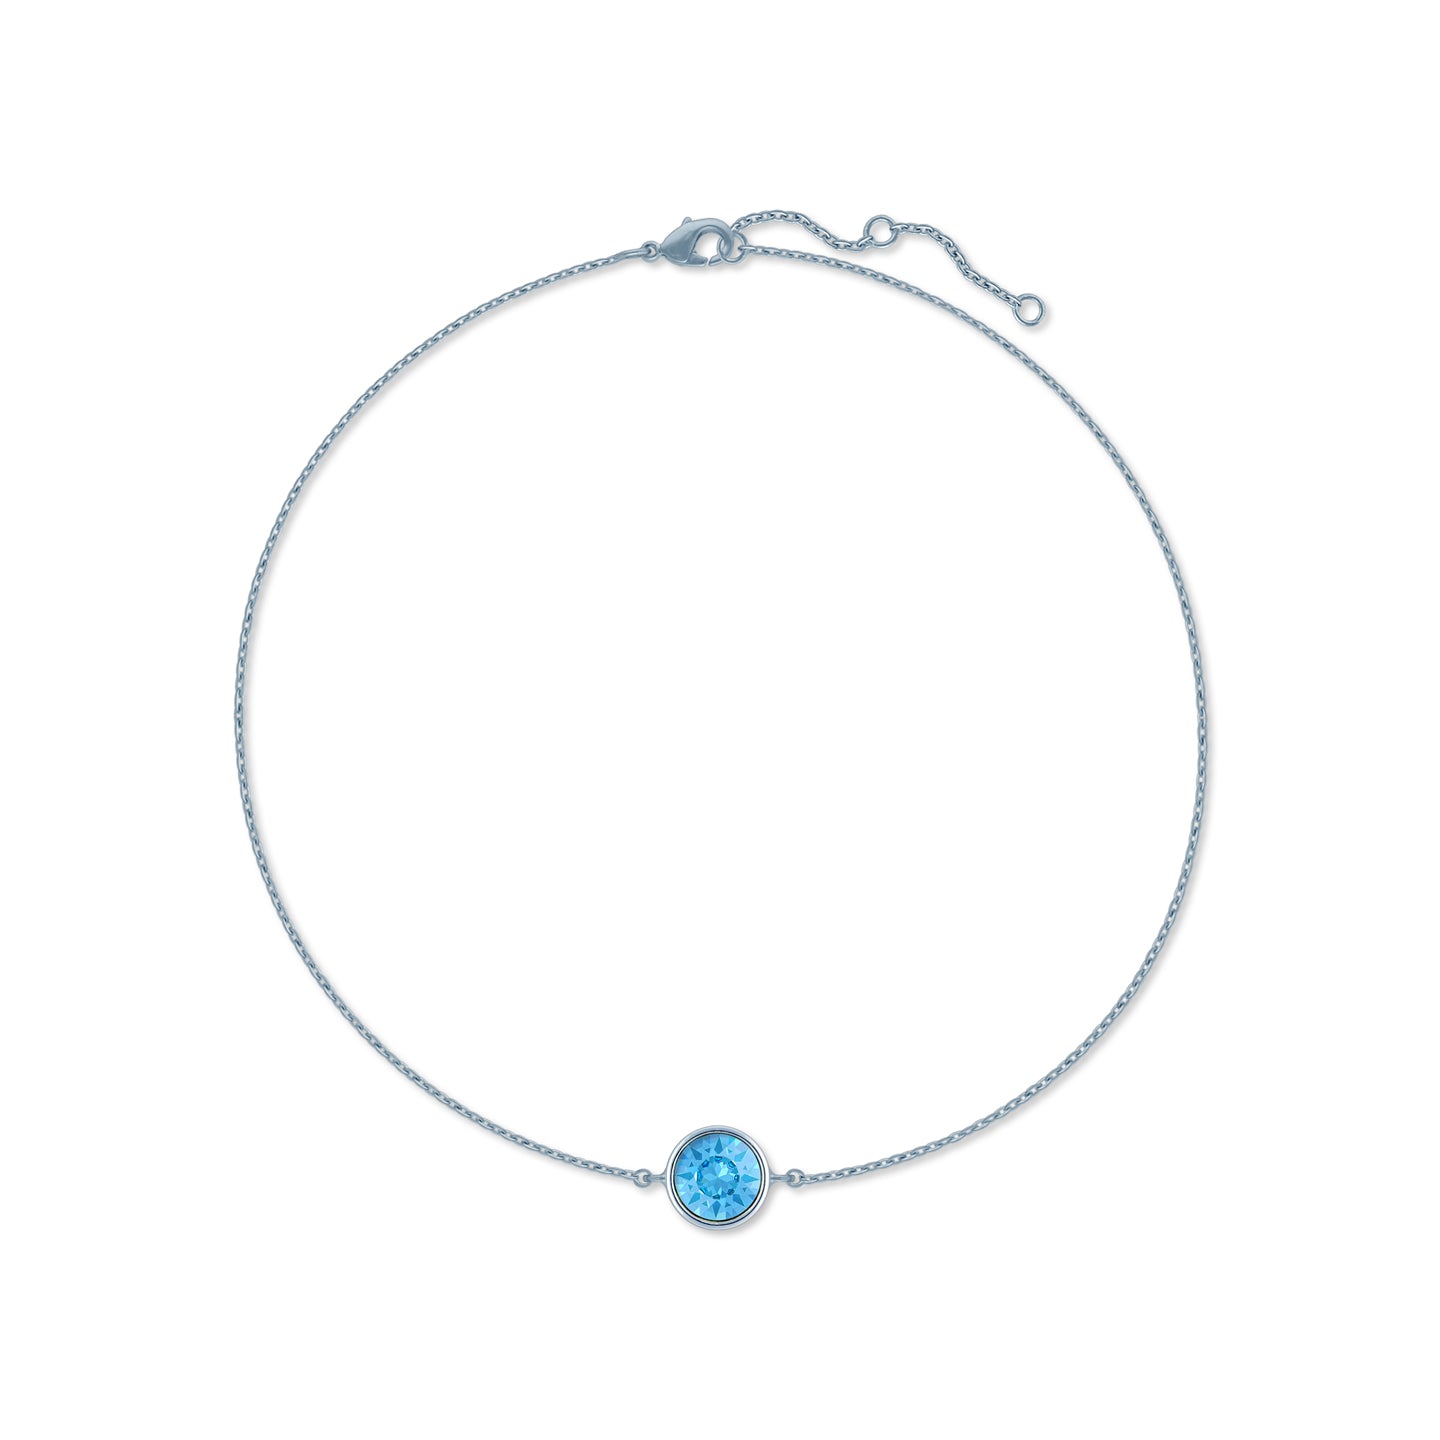 Harley Chain Bracelet with Blue Aquamarine Round Crystals from Swarovski Silver Toned Rhodium Plated - Ed Heart